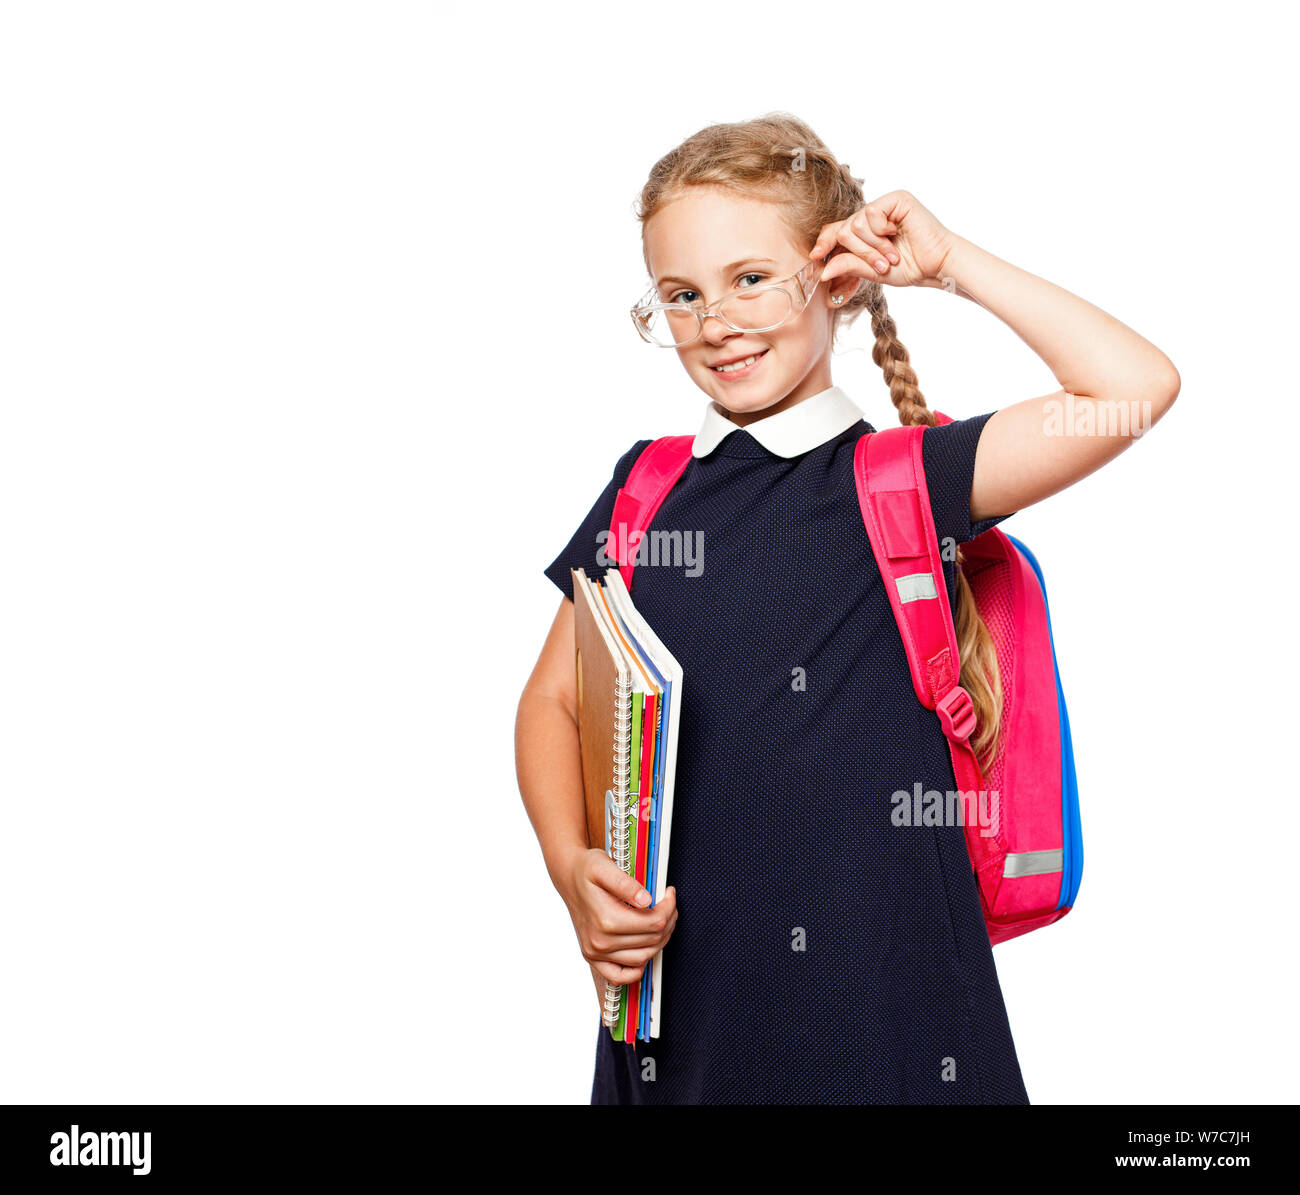 Cheerful 8 years old schoolgirl with backpack wearing uniform standing isolated over white background. Ready for school Stock Photo